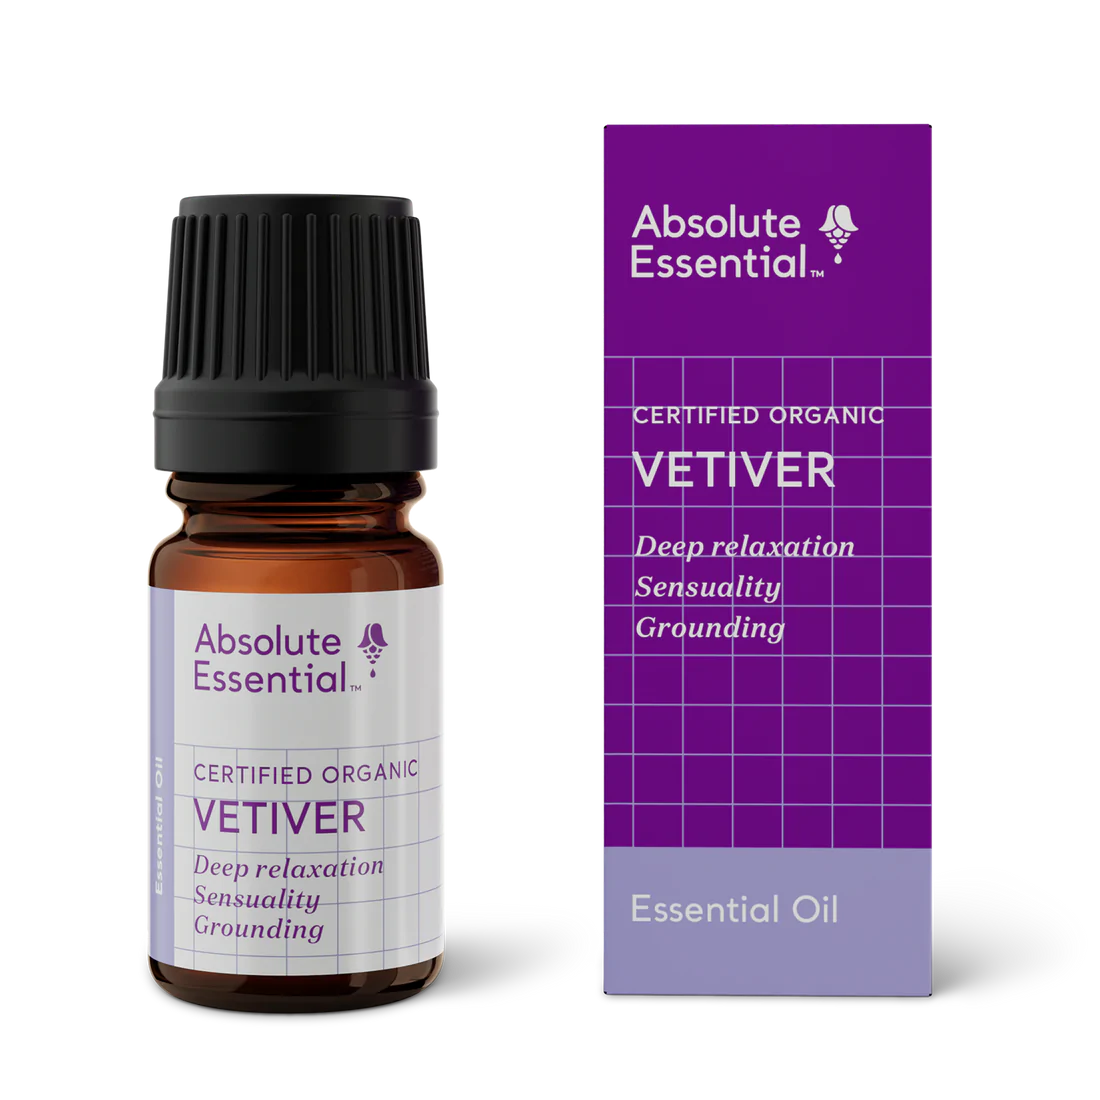 Absolute Essential Vetiver 5ml